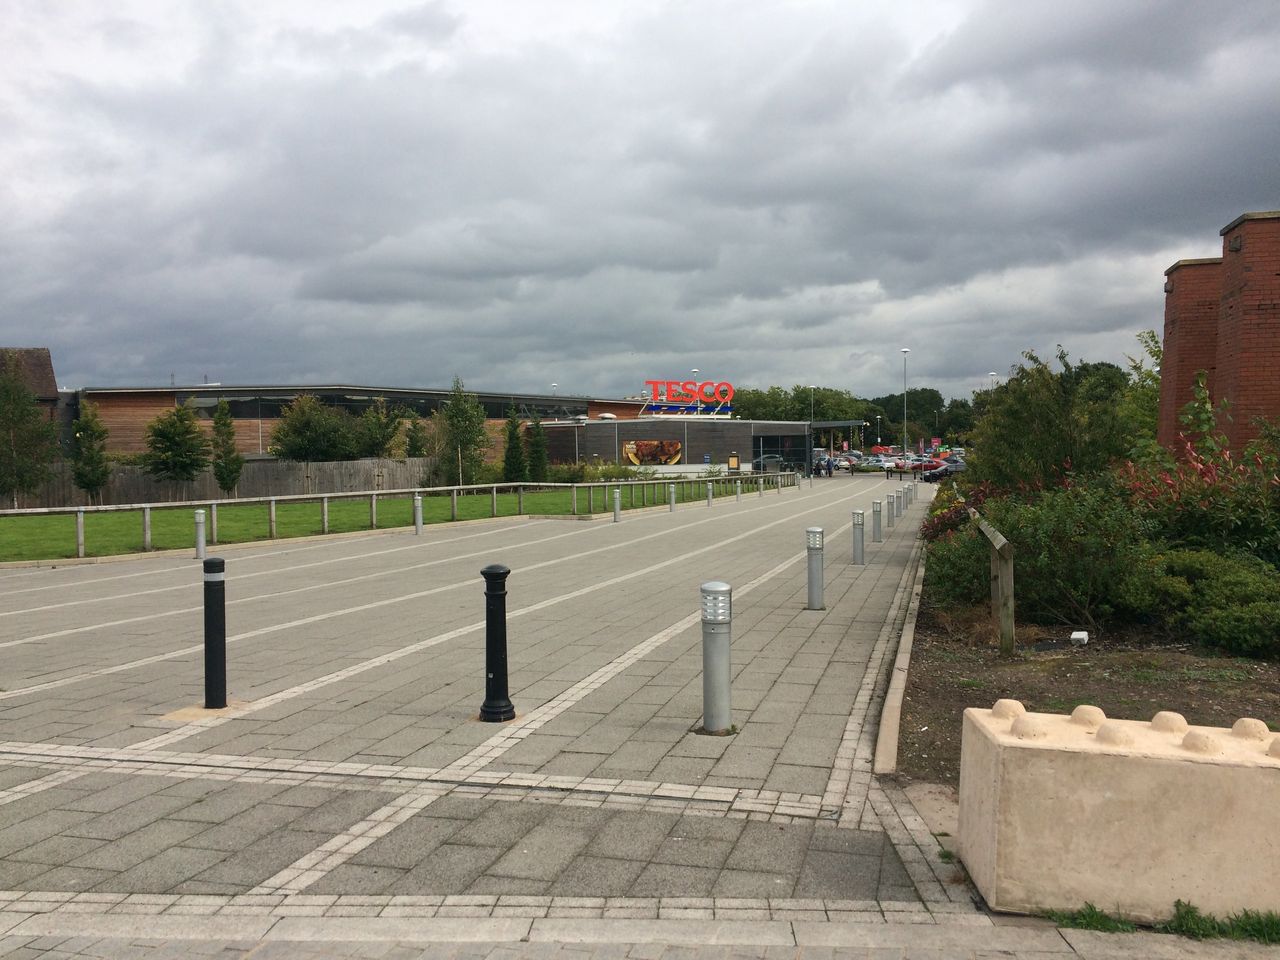 A newly-built Tesco on a ring road typifies recent development in Rugeley. The store offers free parking, unlike the town centre